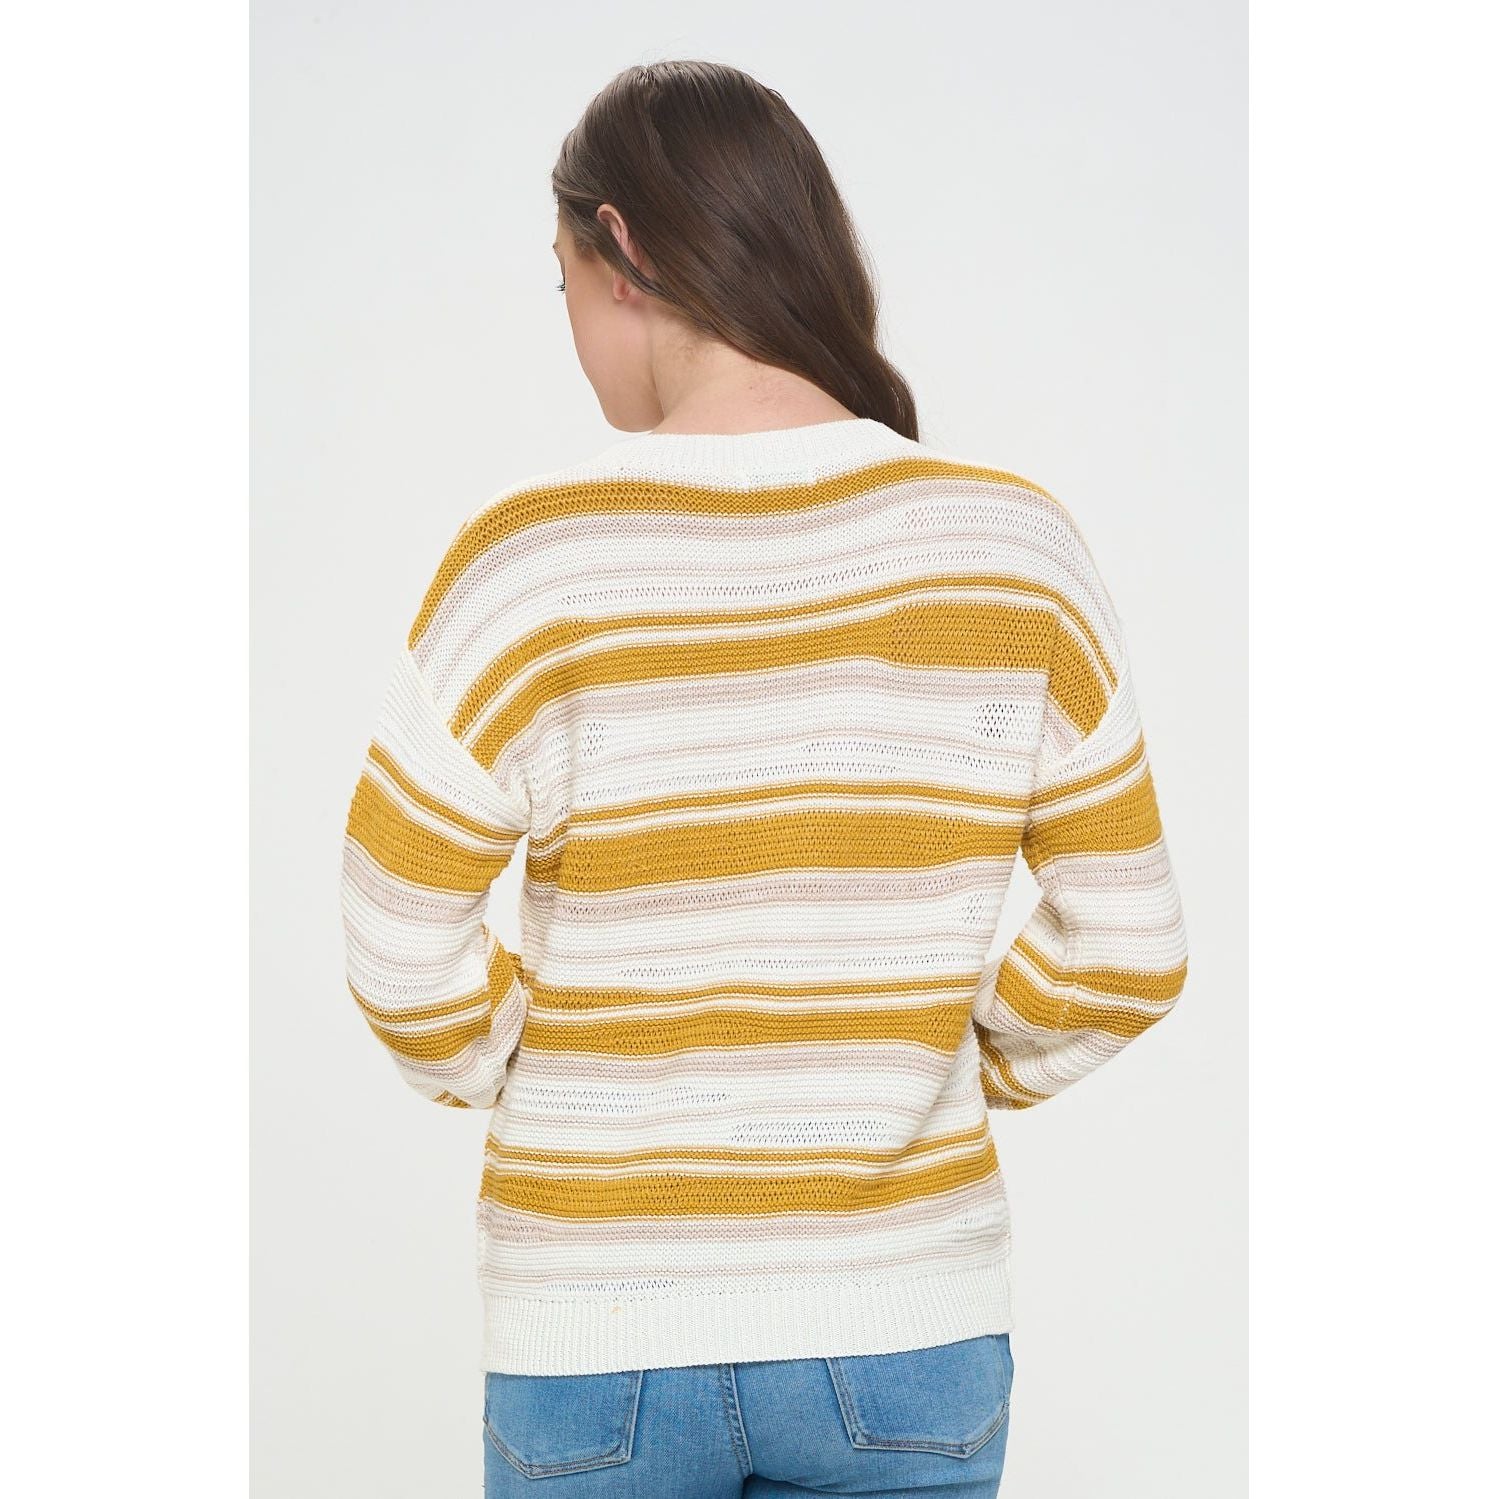 Sunset Sail Striped Sweater - KME means the very best